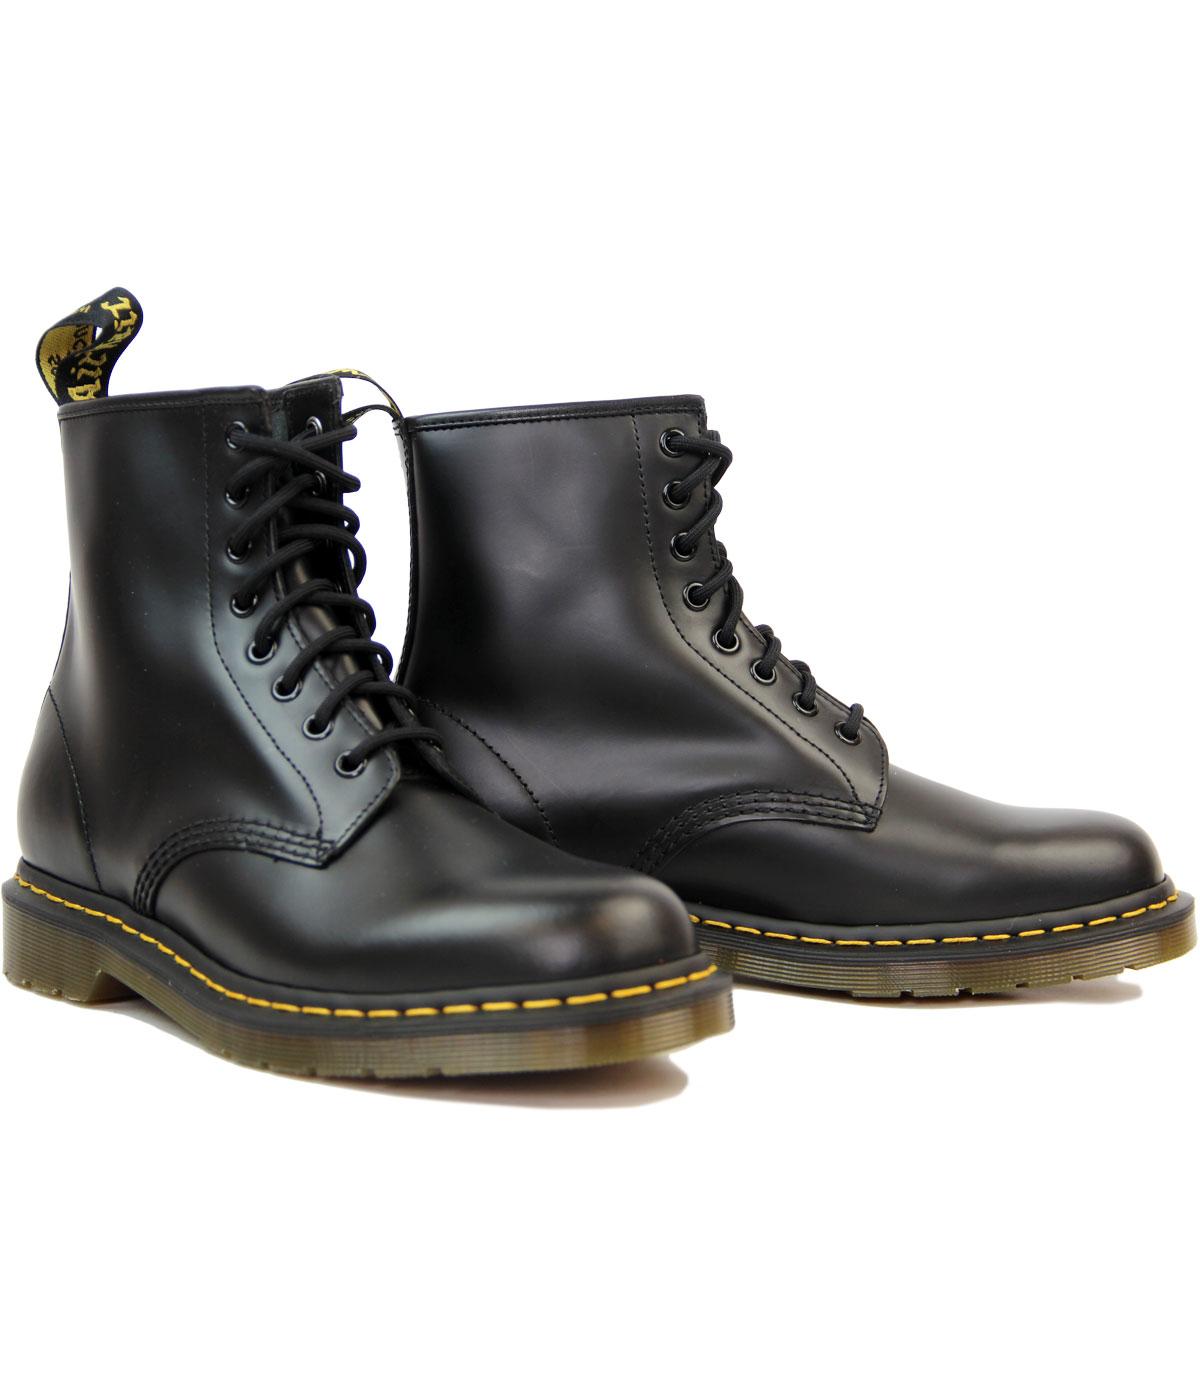 Dr Martens 1460 Retro Mod Classic Smooth Black Leather Boots